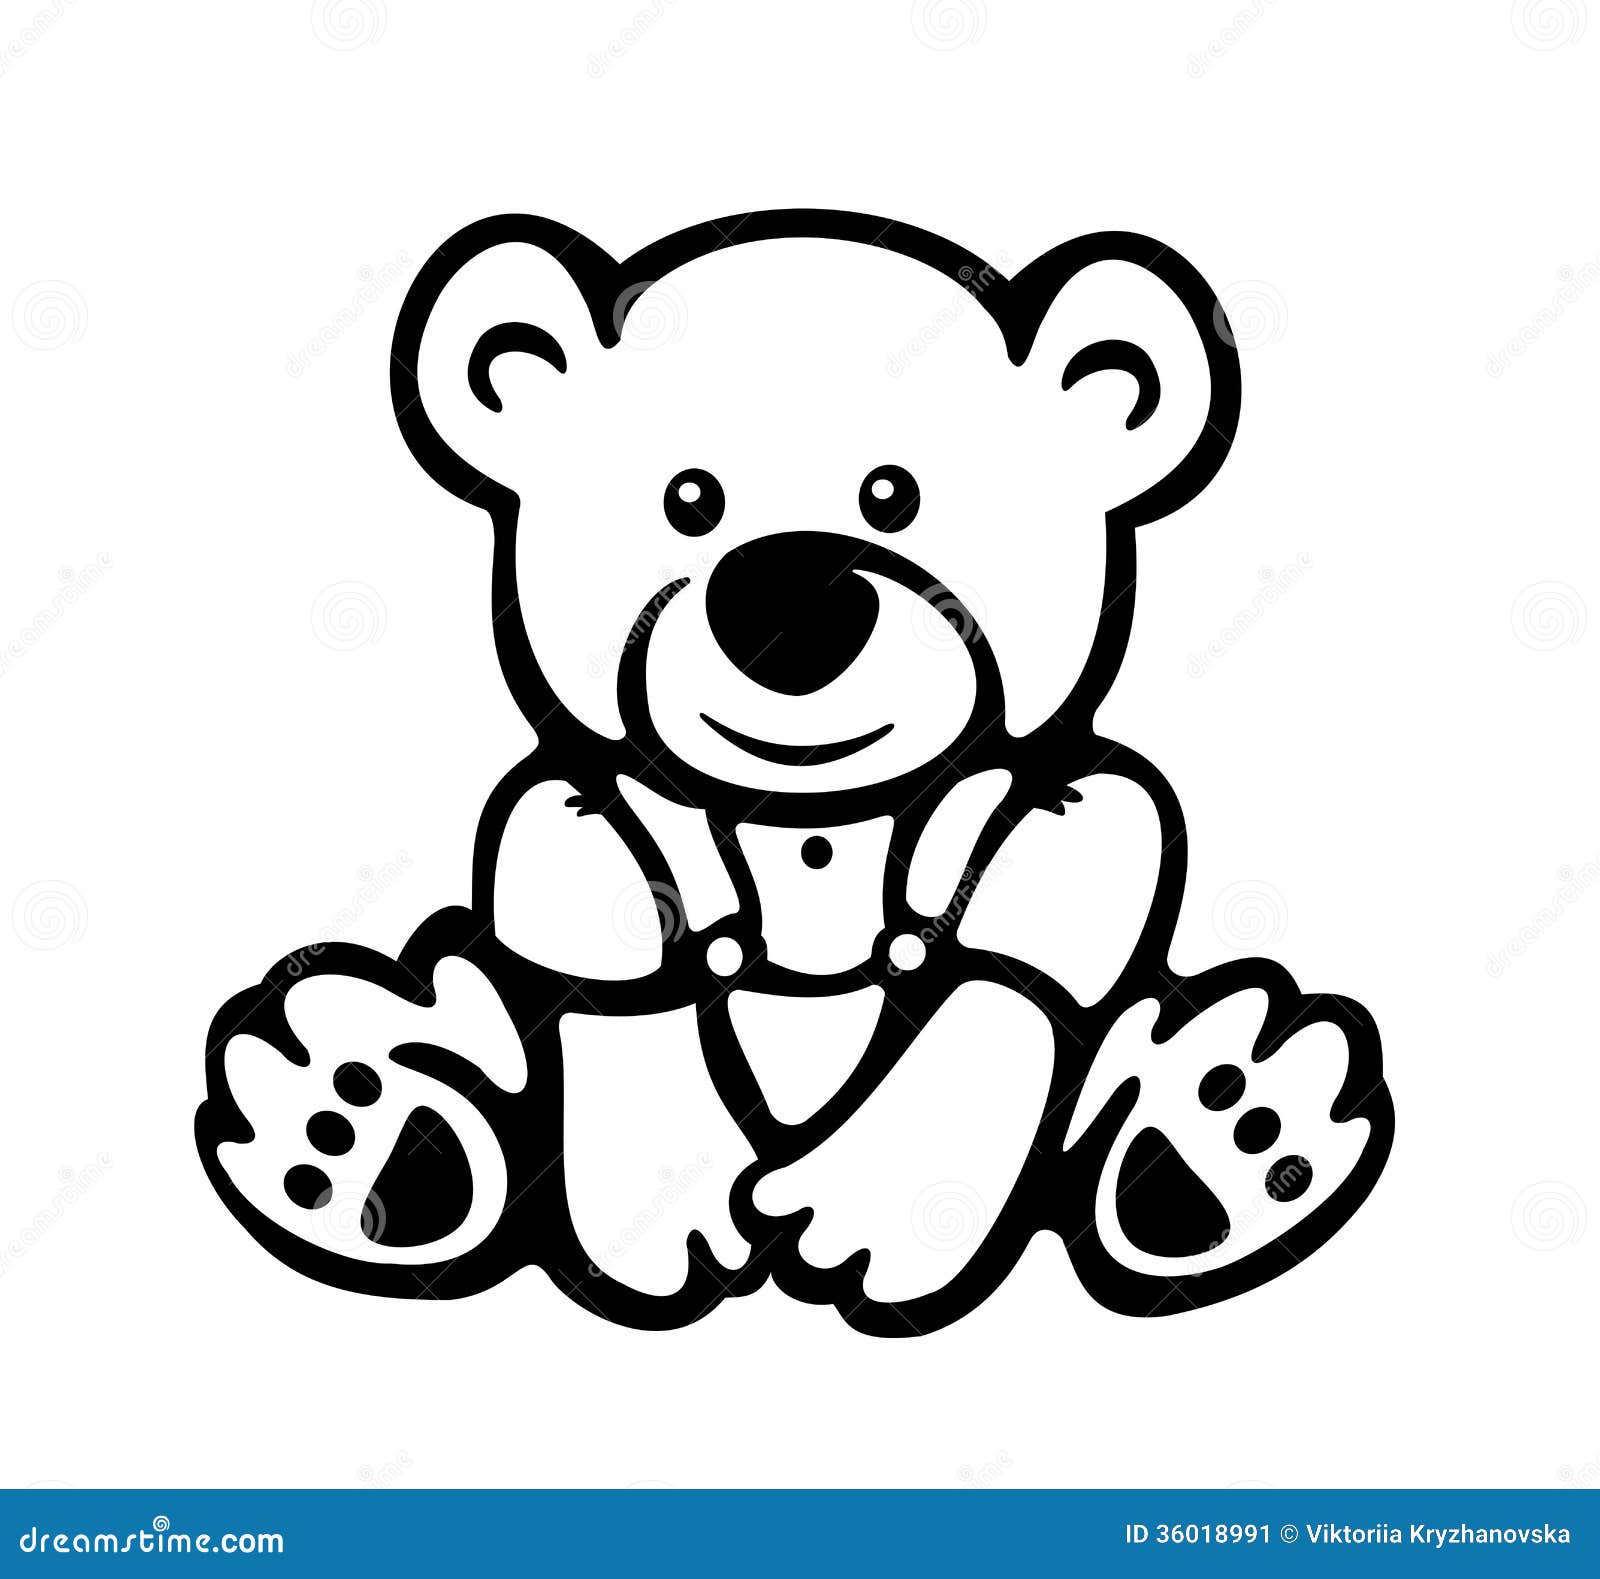 Download Vector Of Cute Baby Bear Silhouette. Stock Vector ...